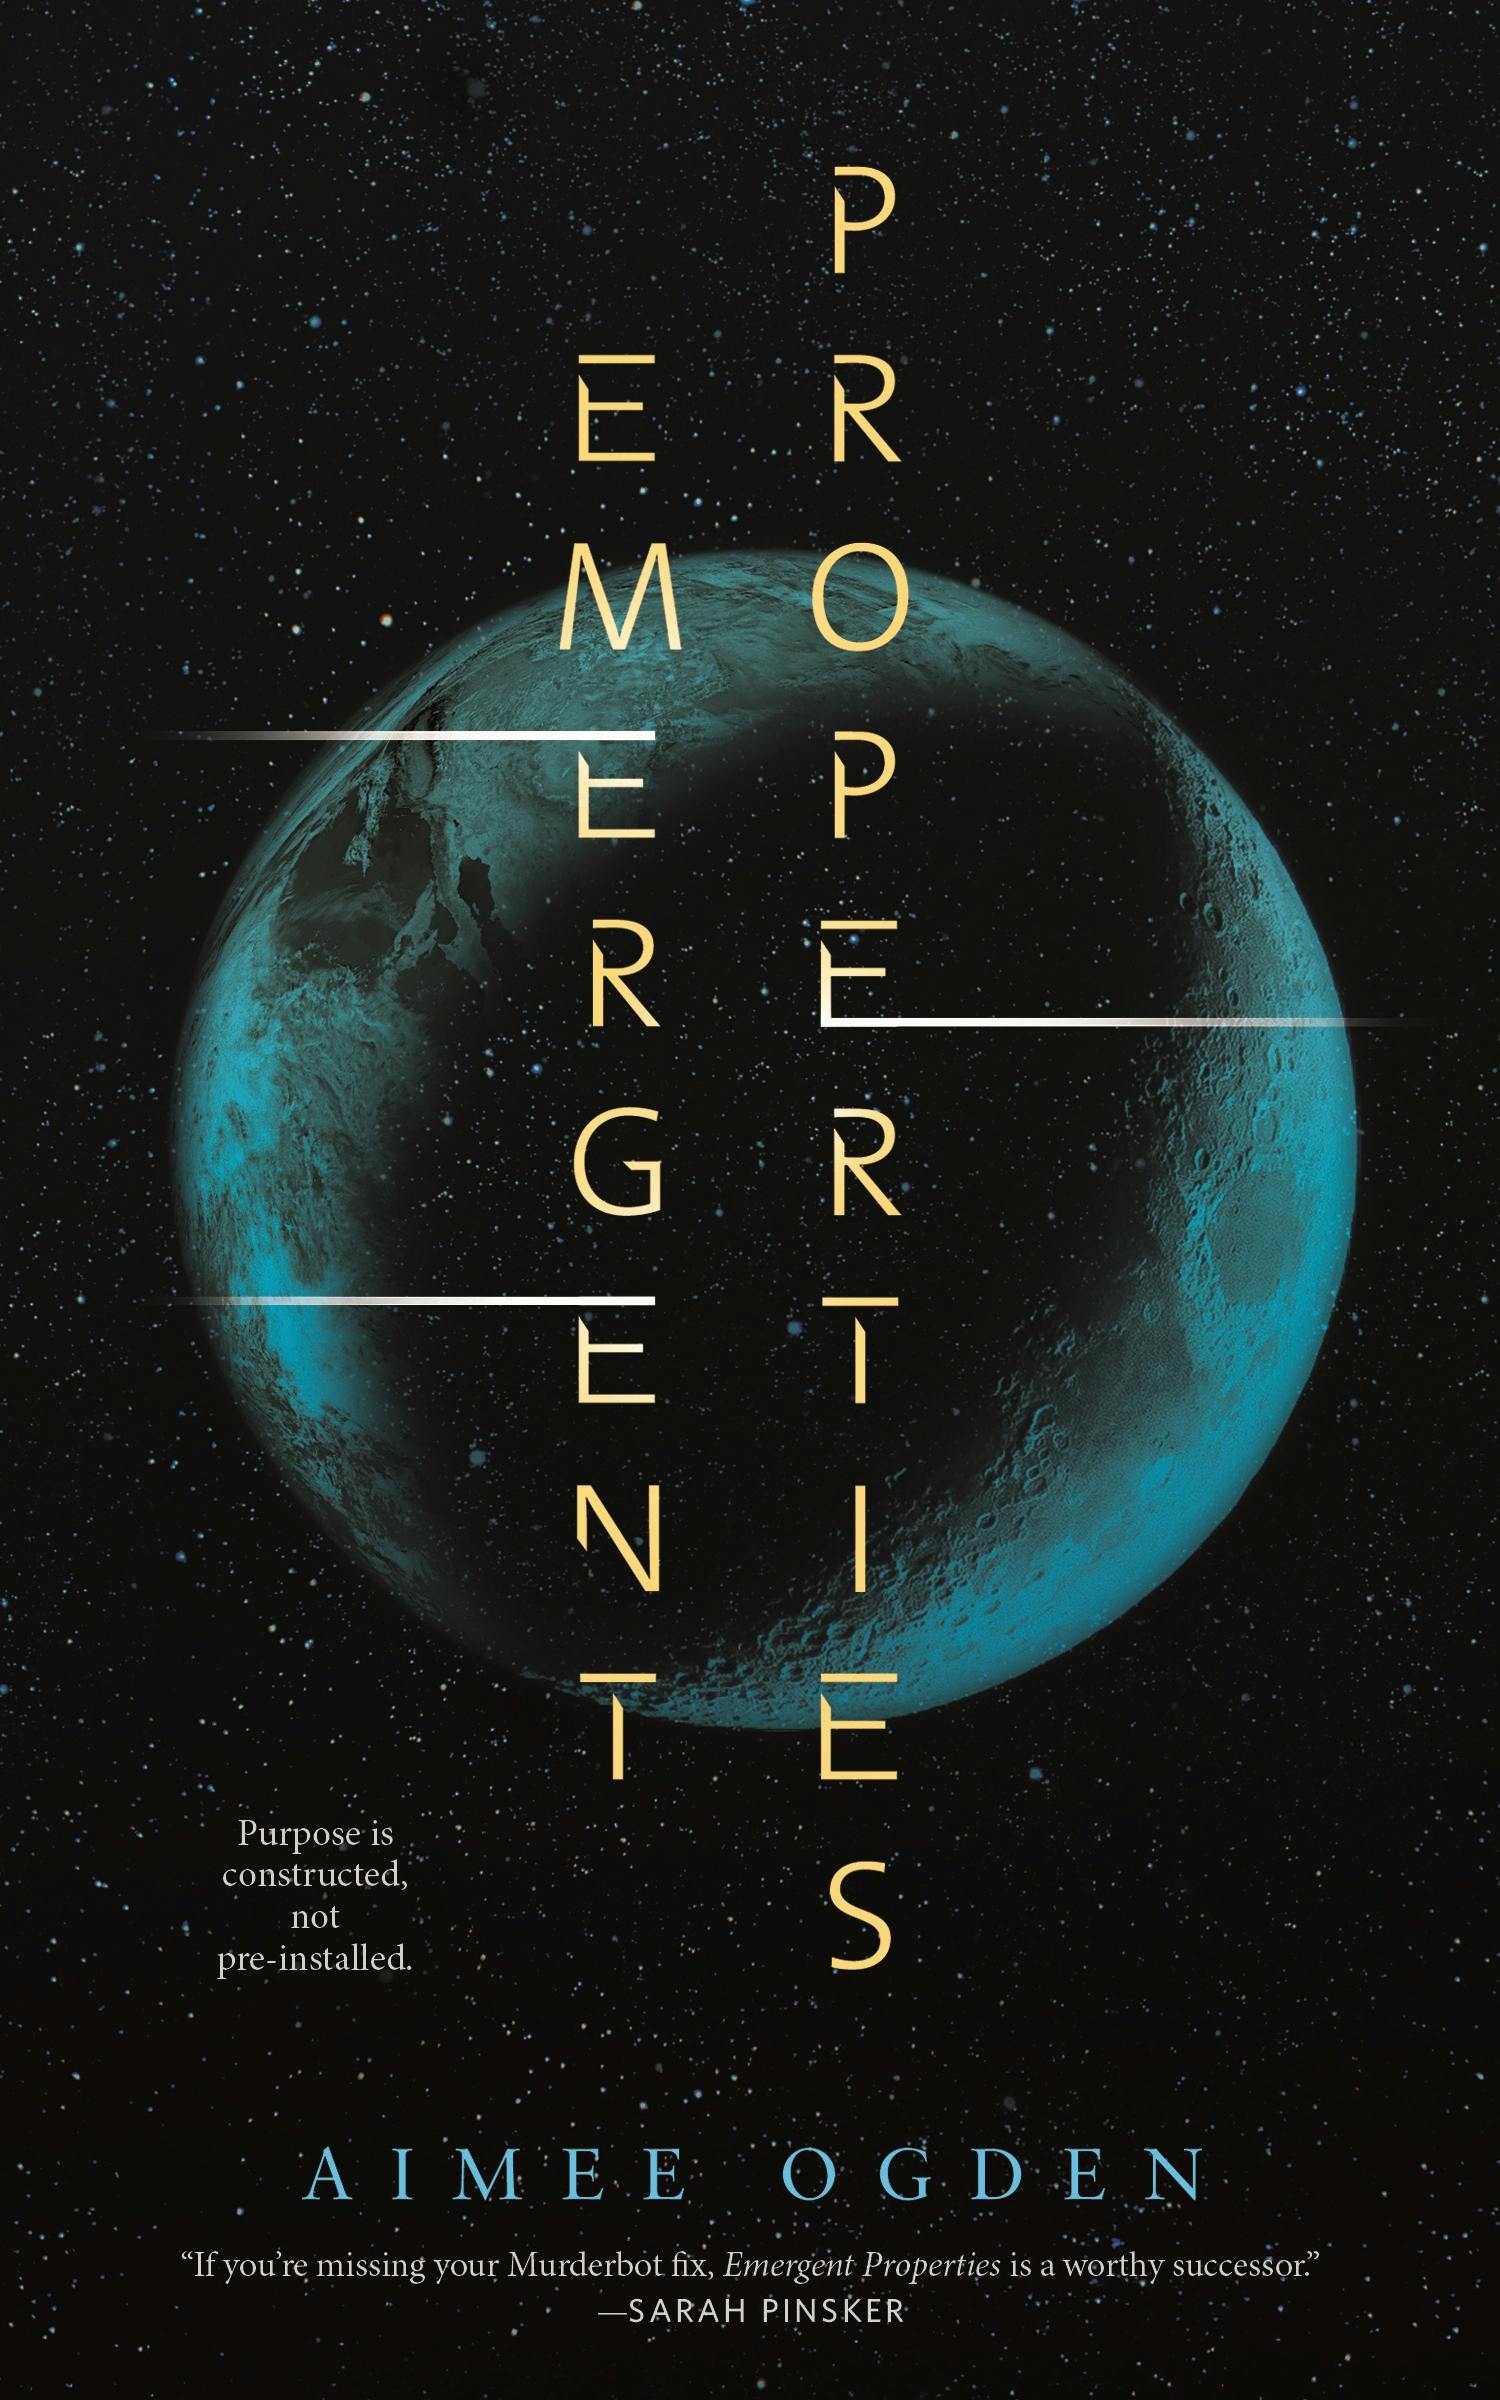 Cover for the book titled as: Emergent Properties